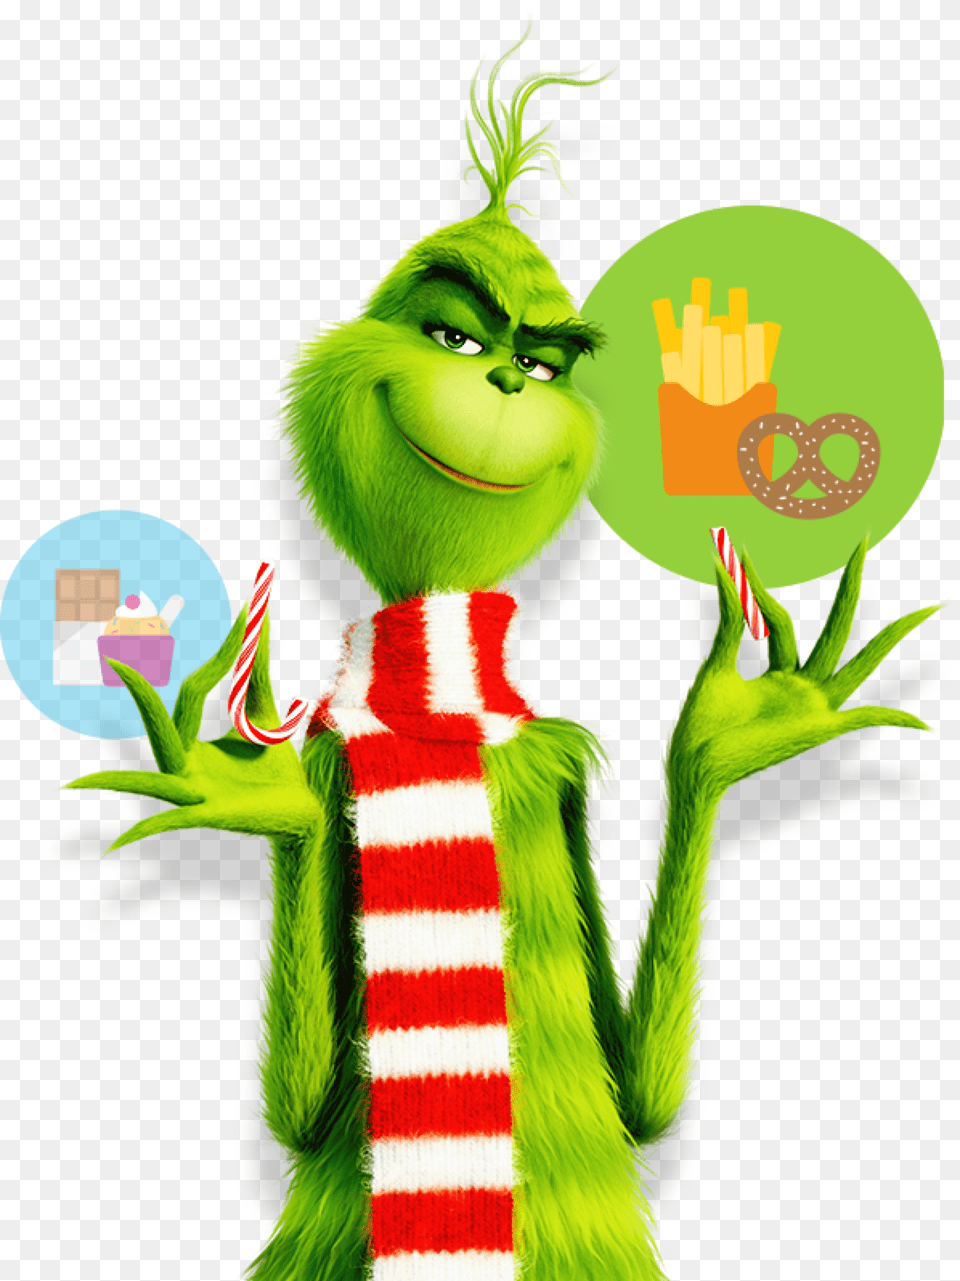 The Grinch Breaks A Sweet Candy Cane Grinch Breaking Candy Cane, Green, Elf, Art, Graphics Png